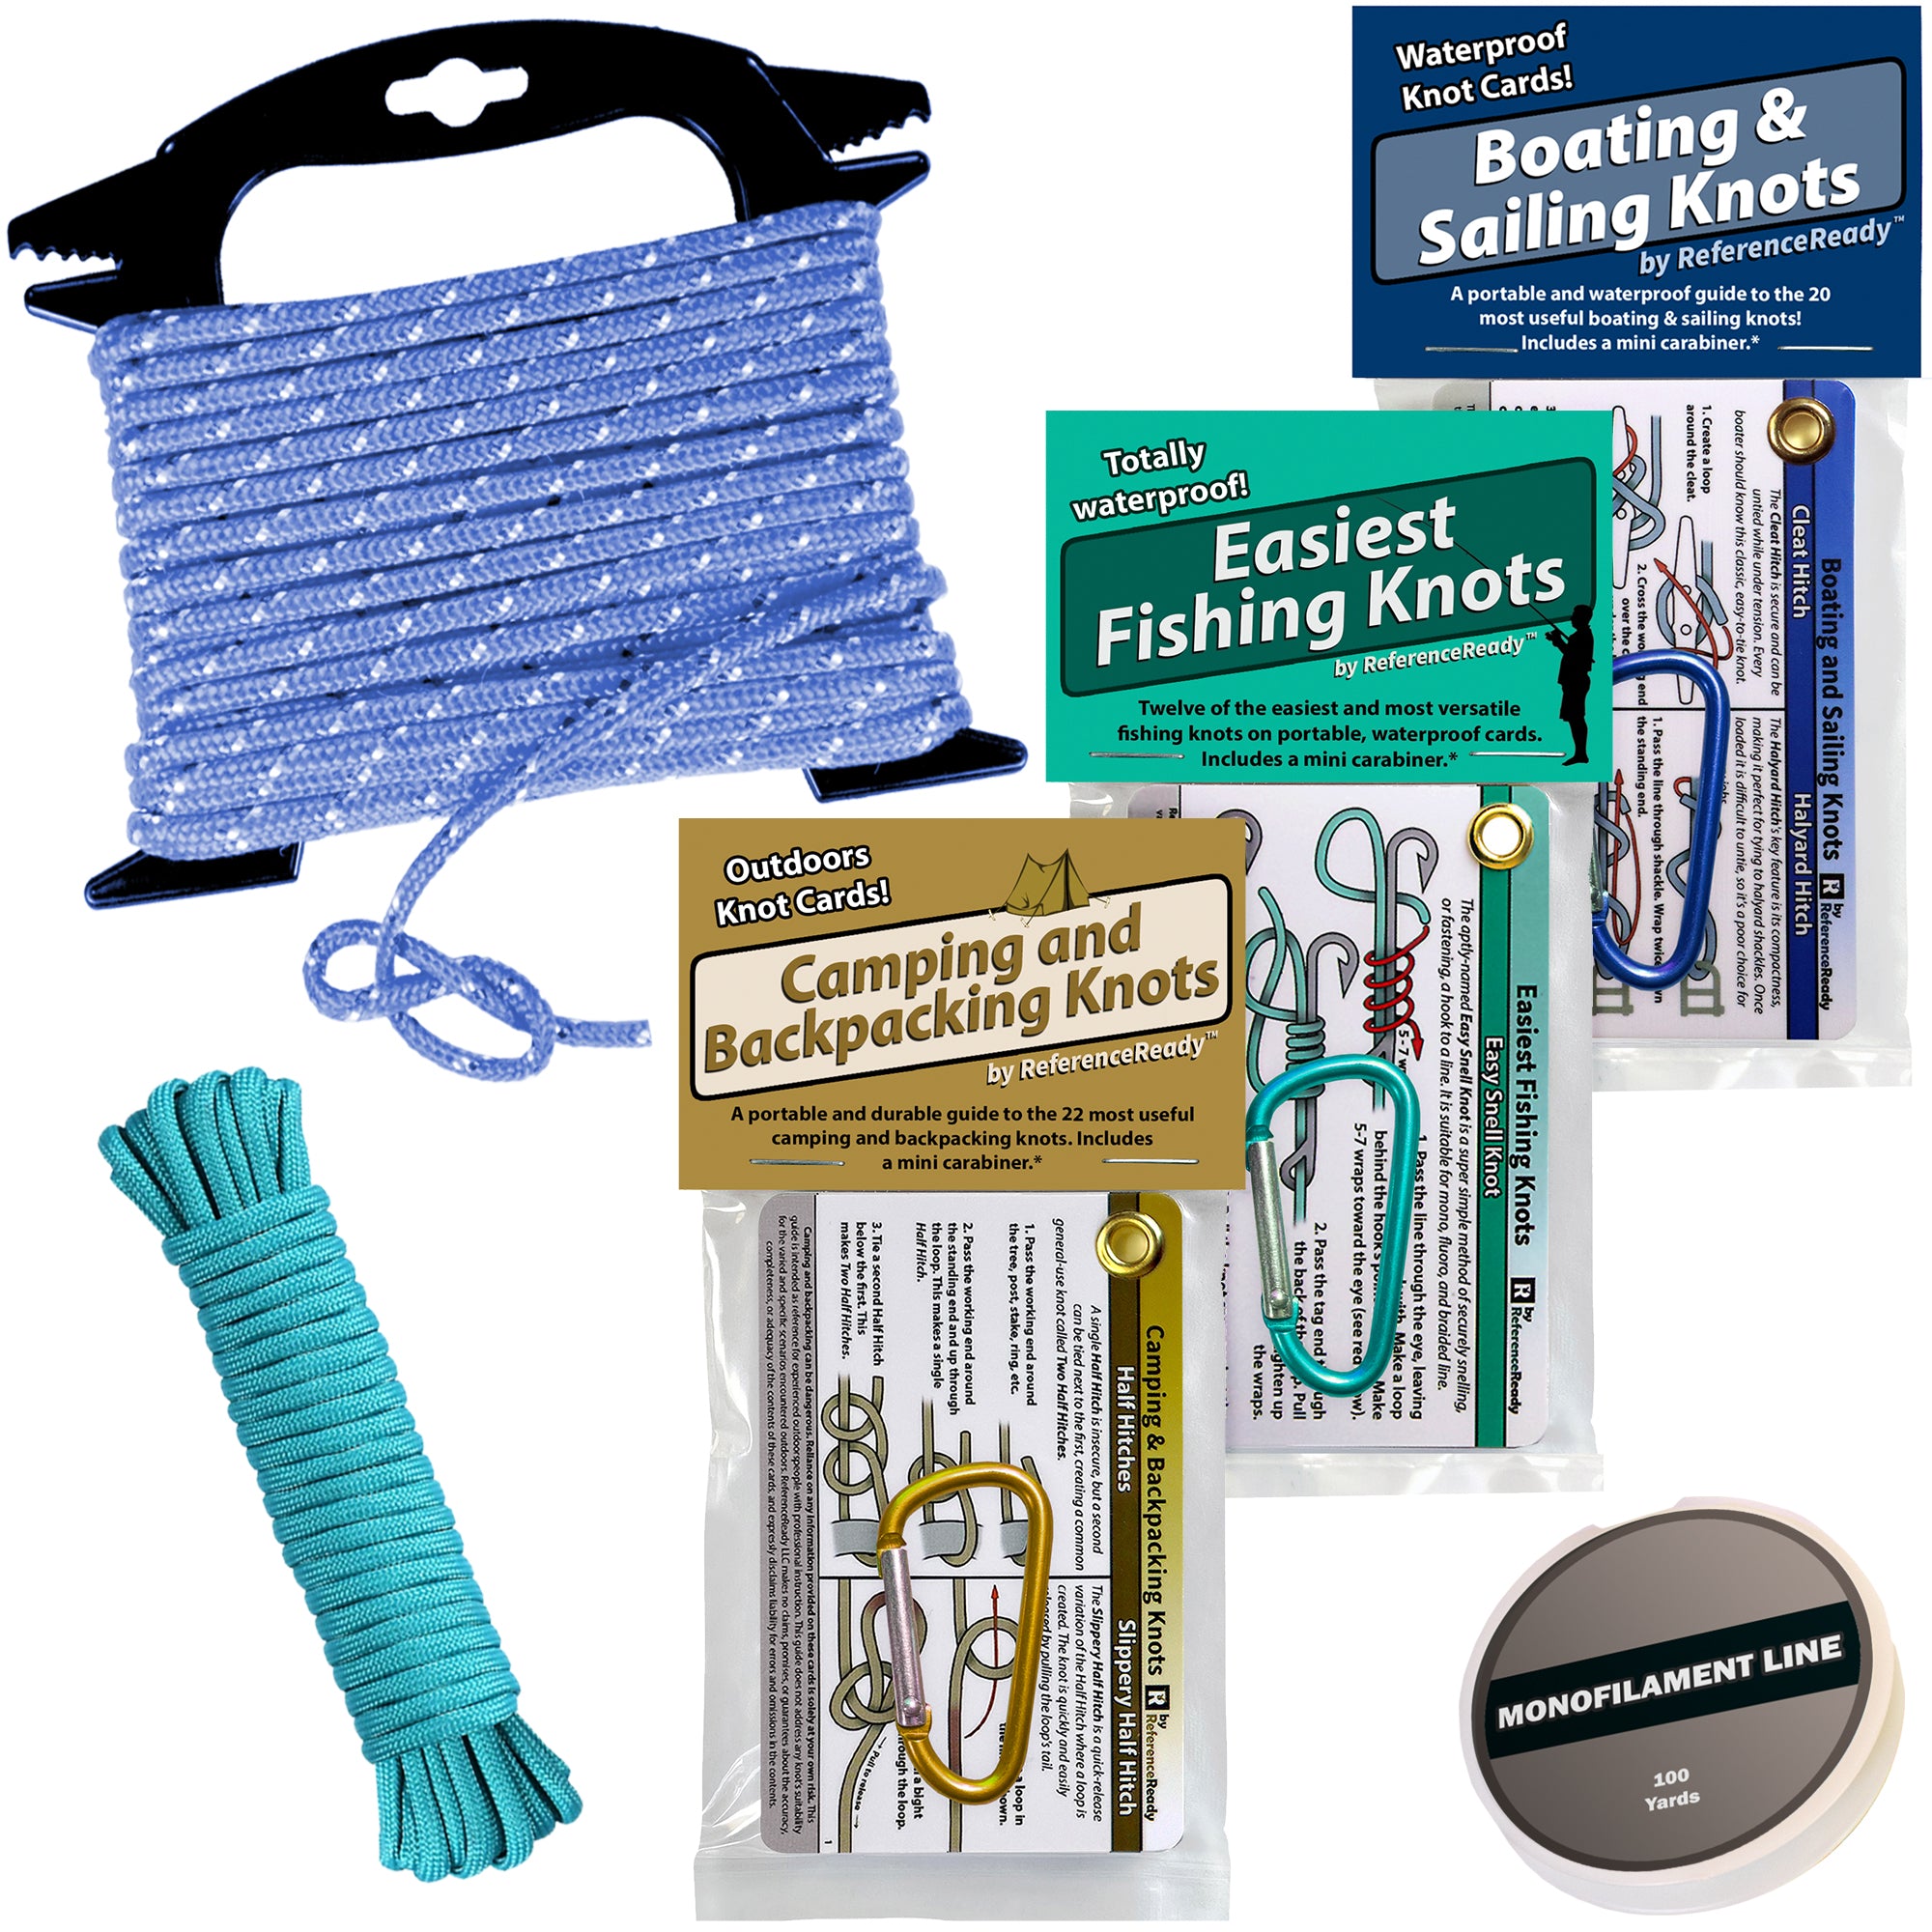 Nautical Books :: Boating Skills & How-To :: Knots, Canvaswork & Rigging ::  PRO-KNOT KNOT TYING KIT